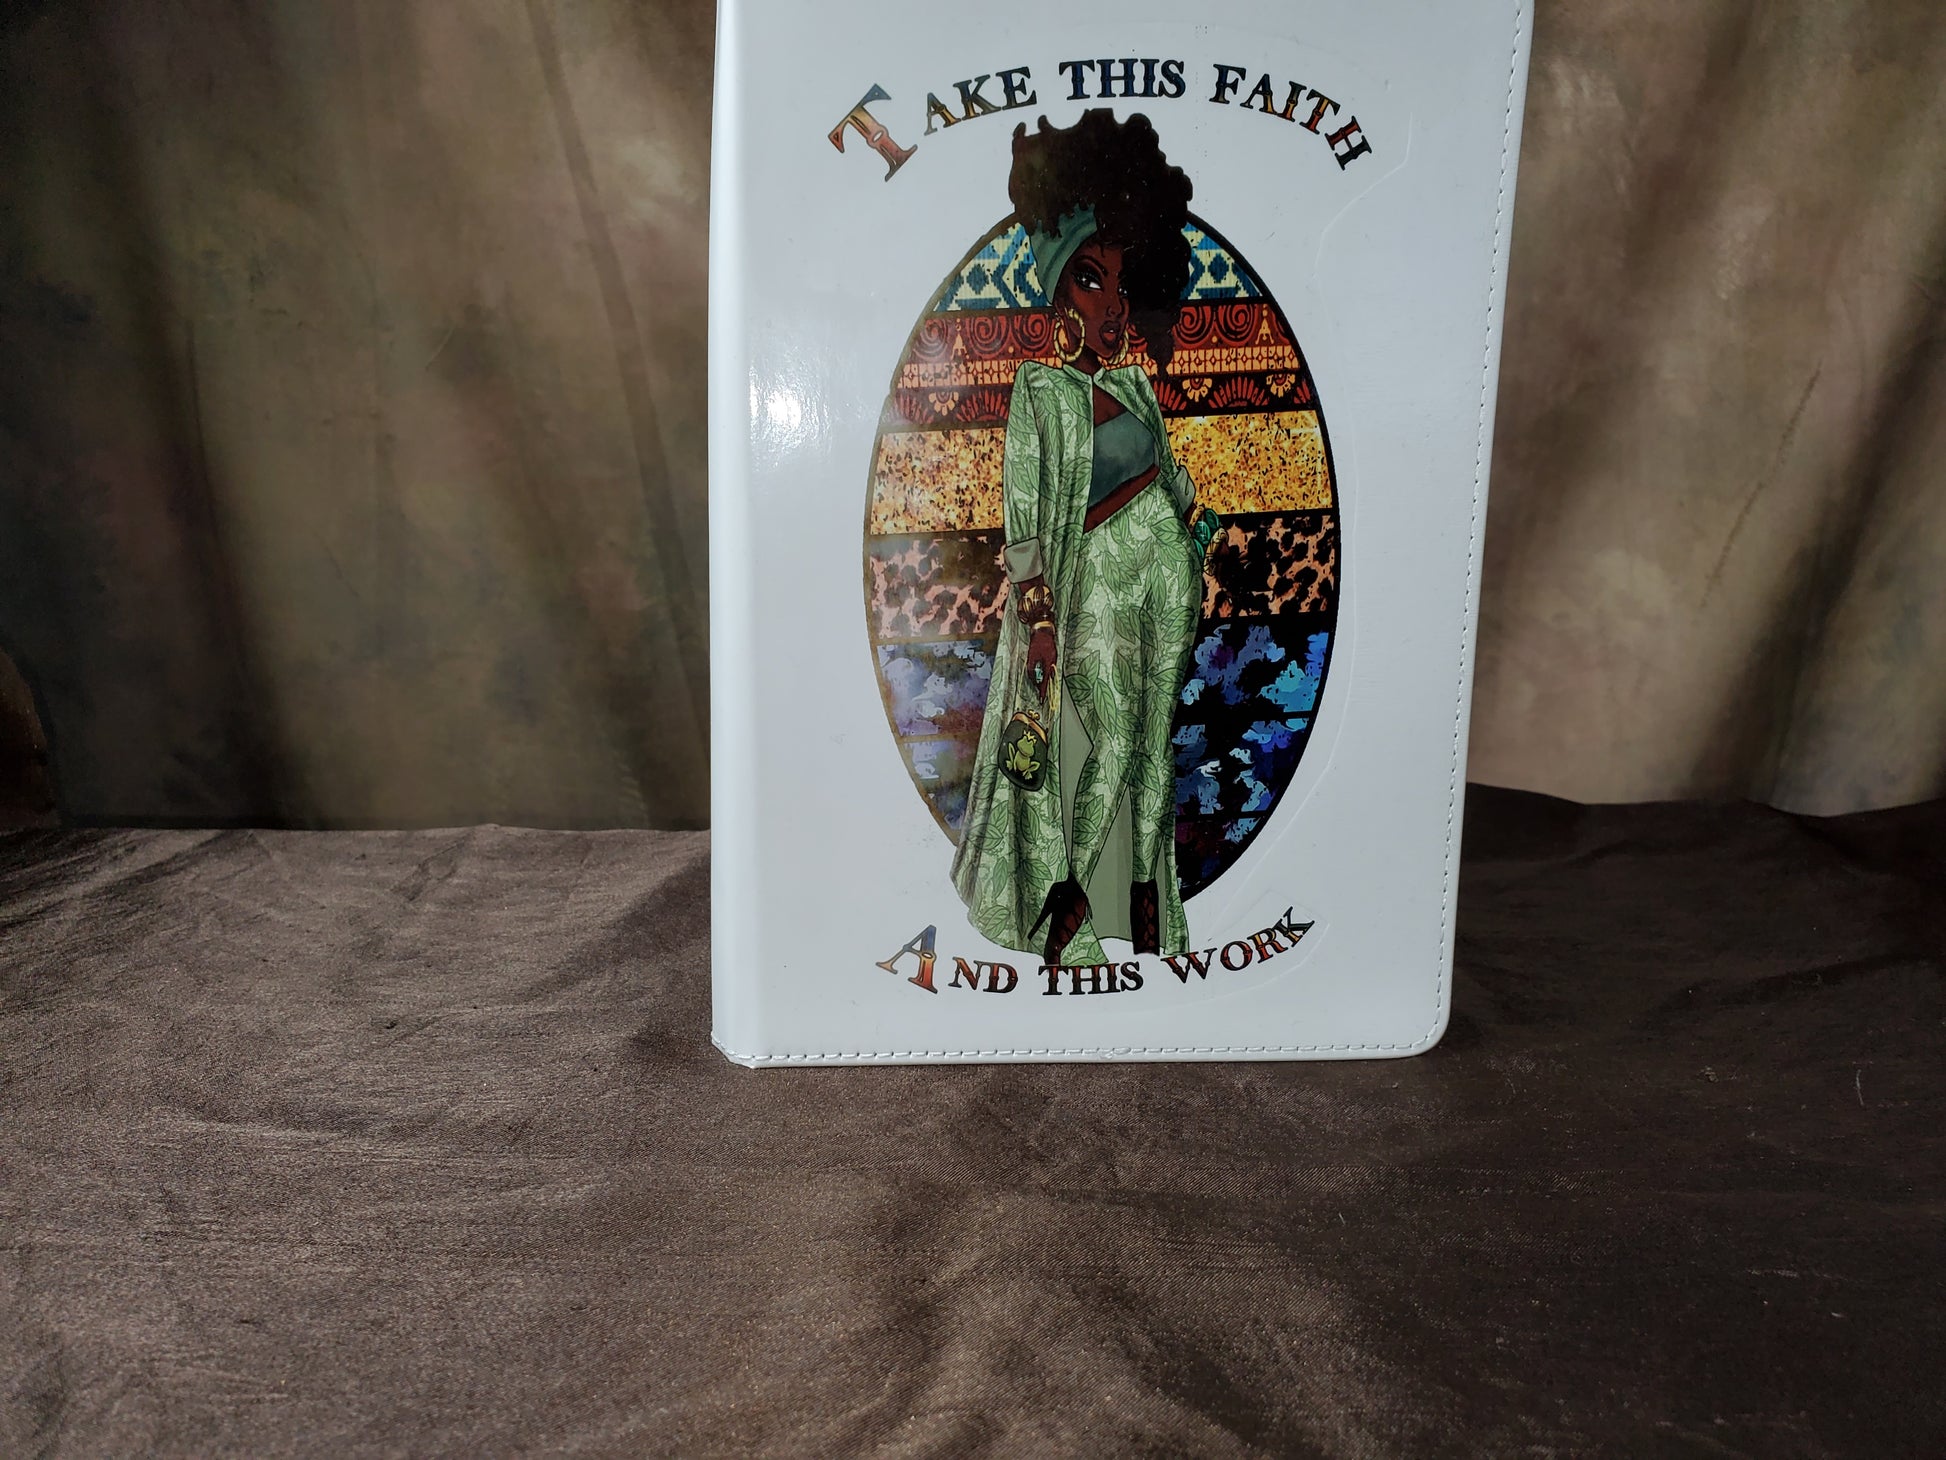 White Leatherette Journal with a picture of a woman in a Fancy green outfit with the words "Take This Faith and This Work"